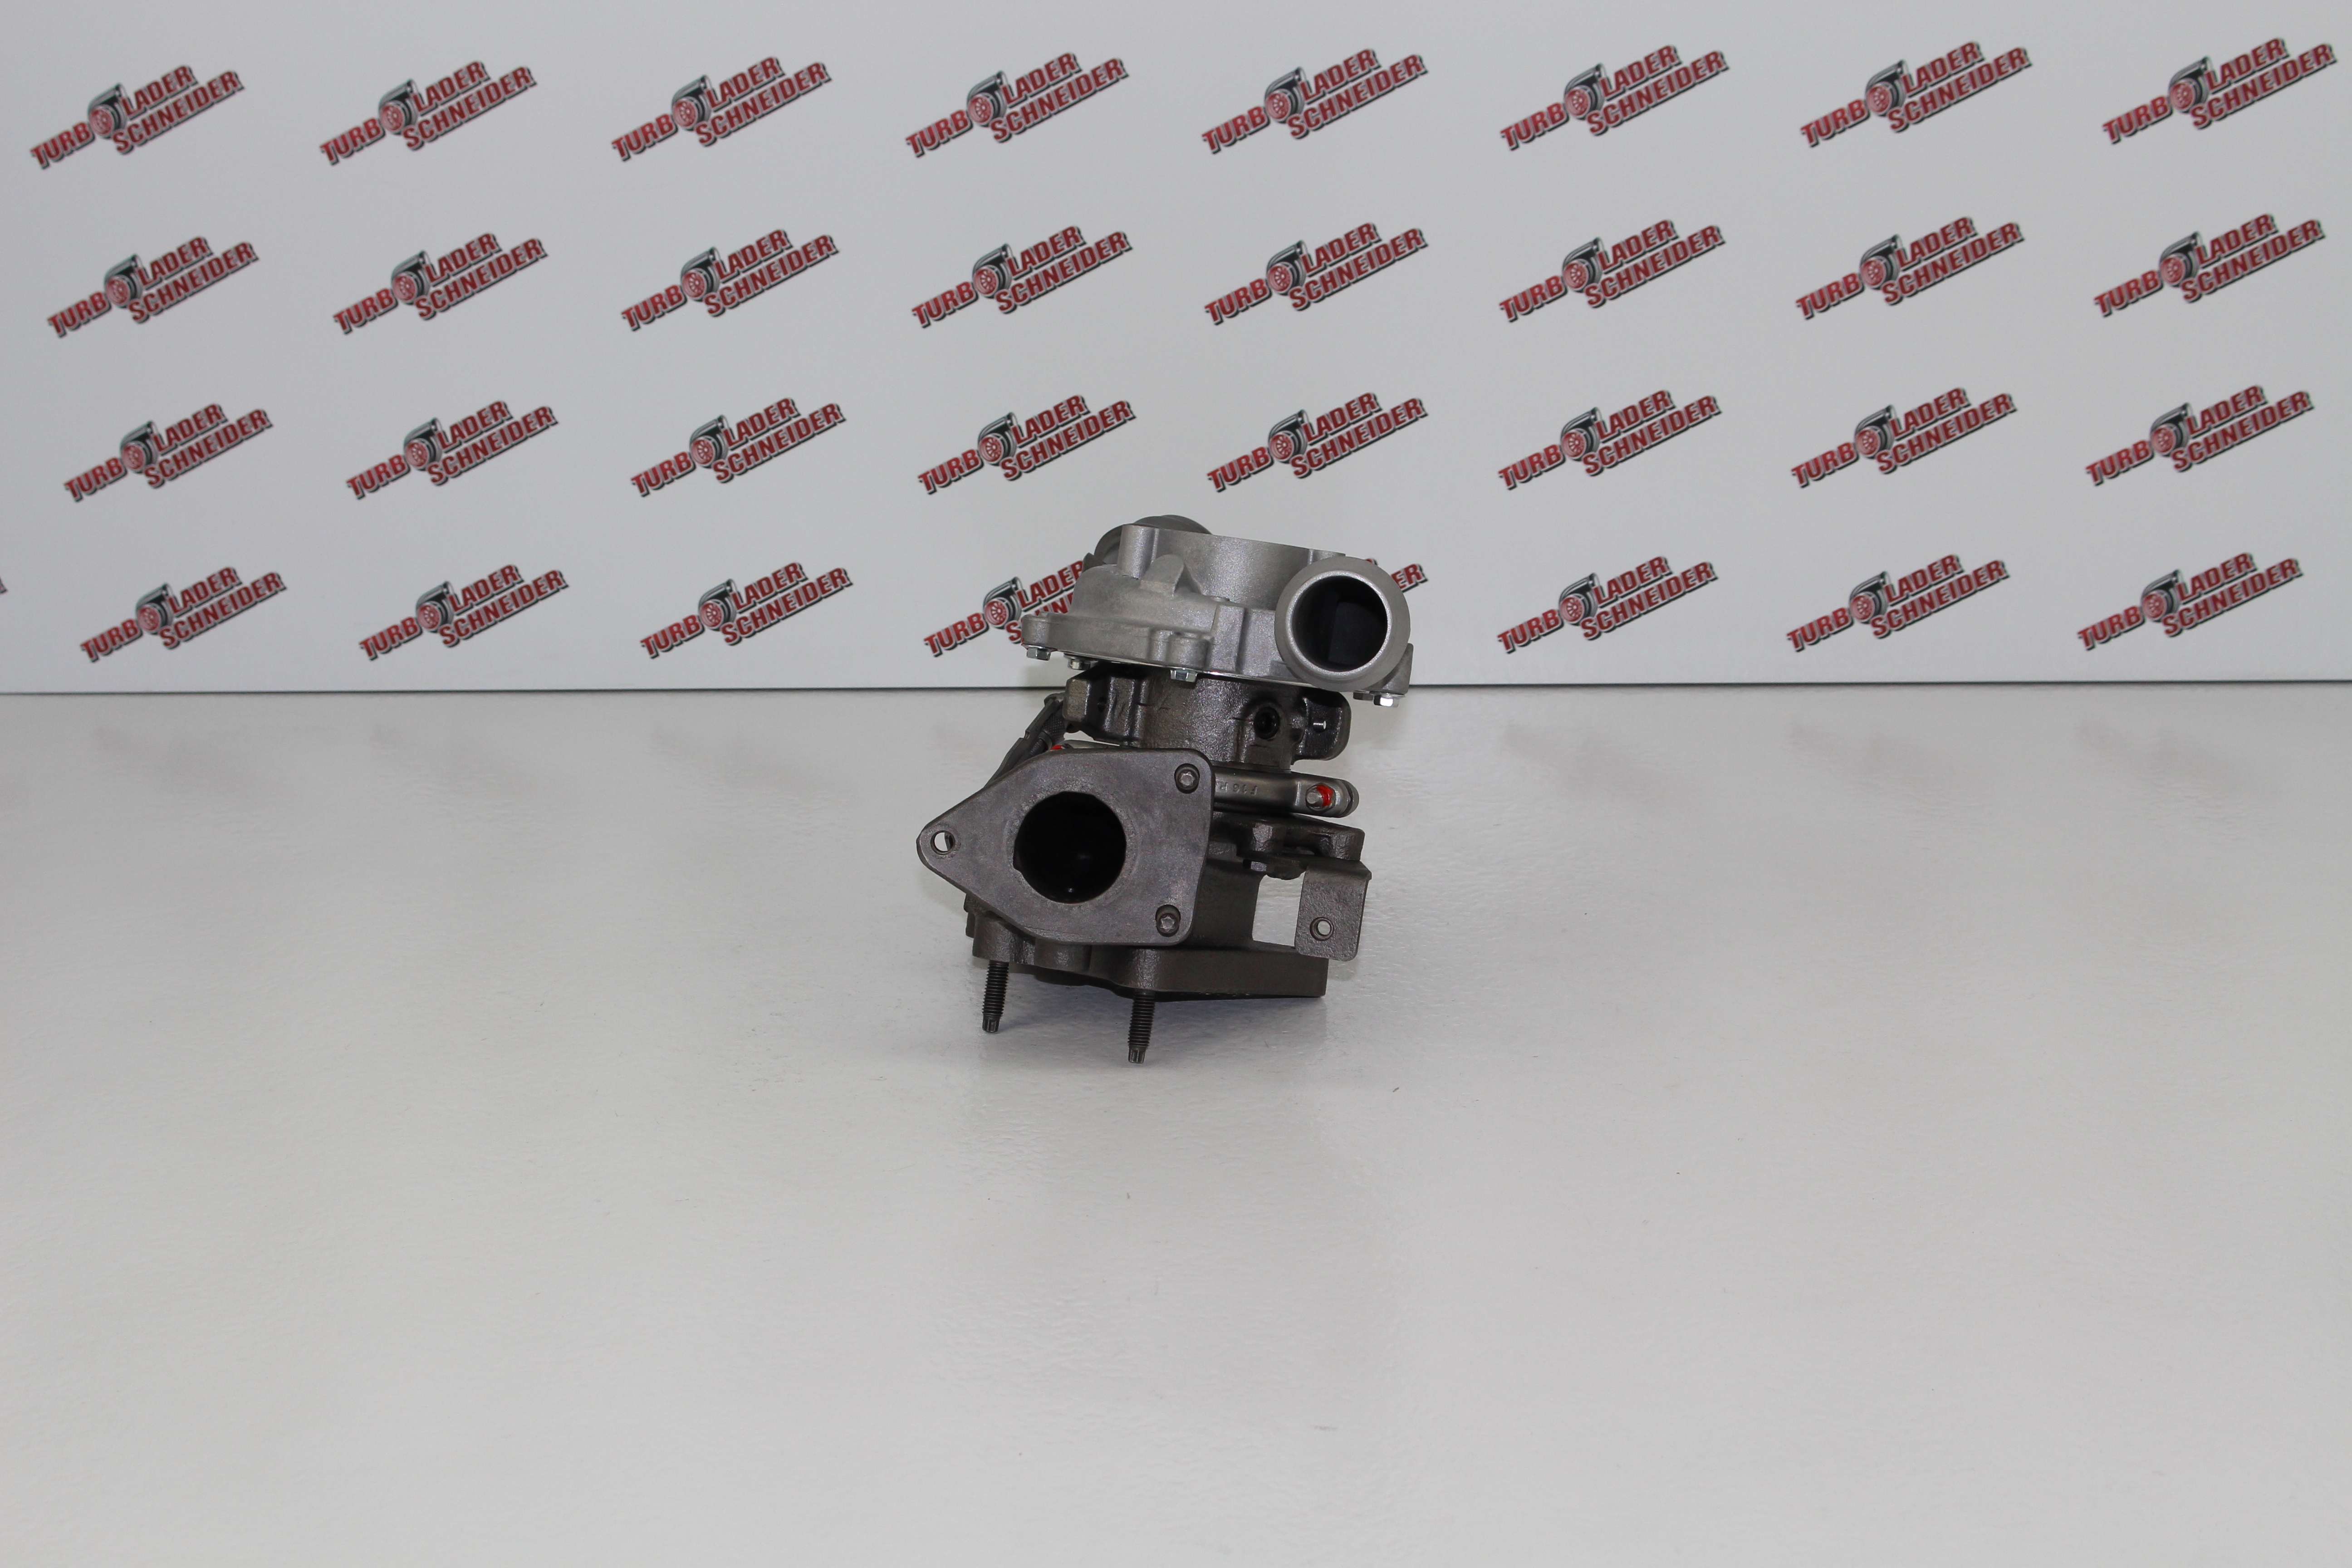 Turbolader Nissan/Opel/Renault 2.3 CDTI/dCi 100/125 74-92 Kw